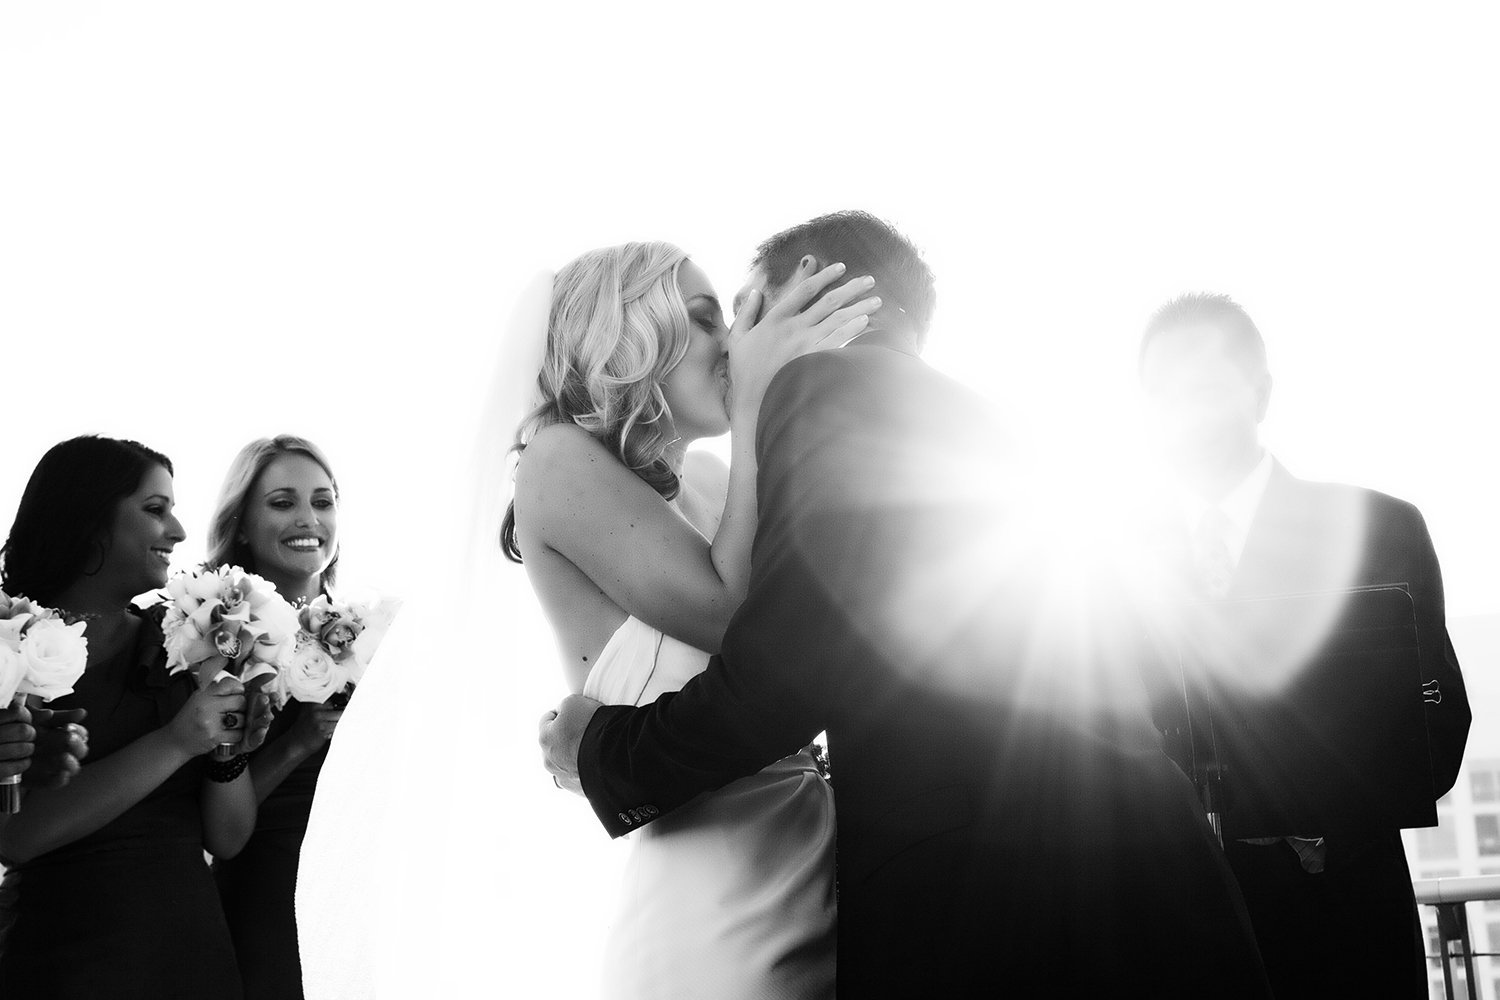 The Ultimate Skybox wedding photos bride and groom kiss at ceremony